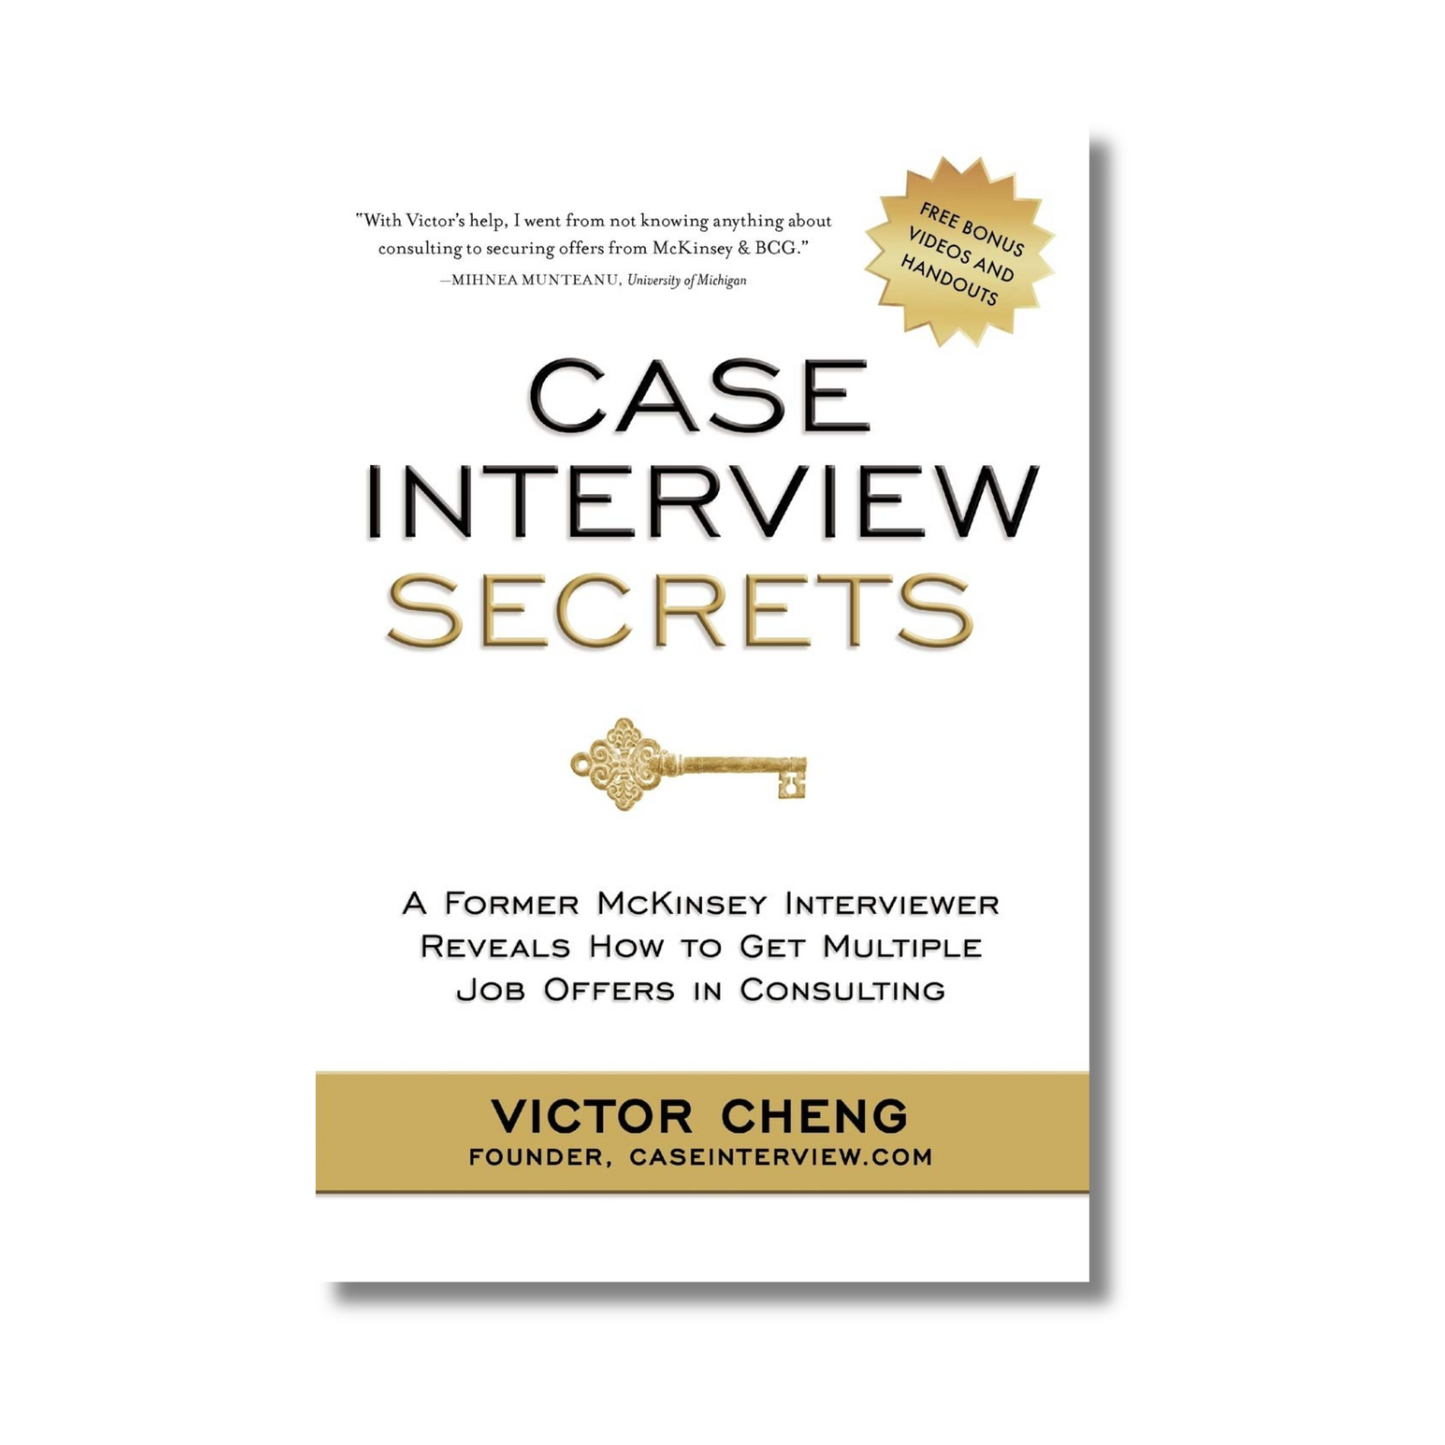 Case Interview Secrets by Victor Cheng (Paperback)